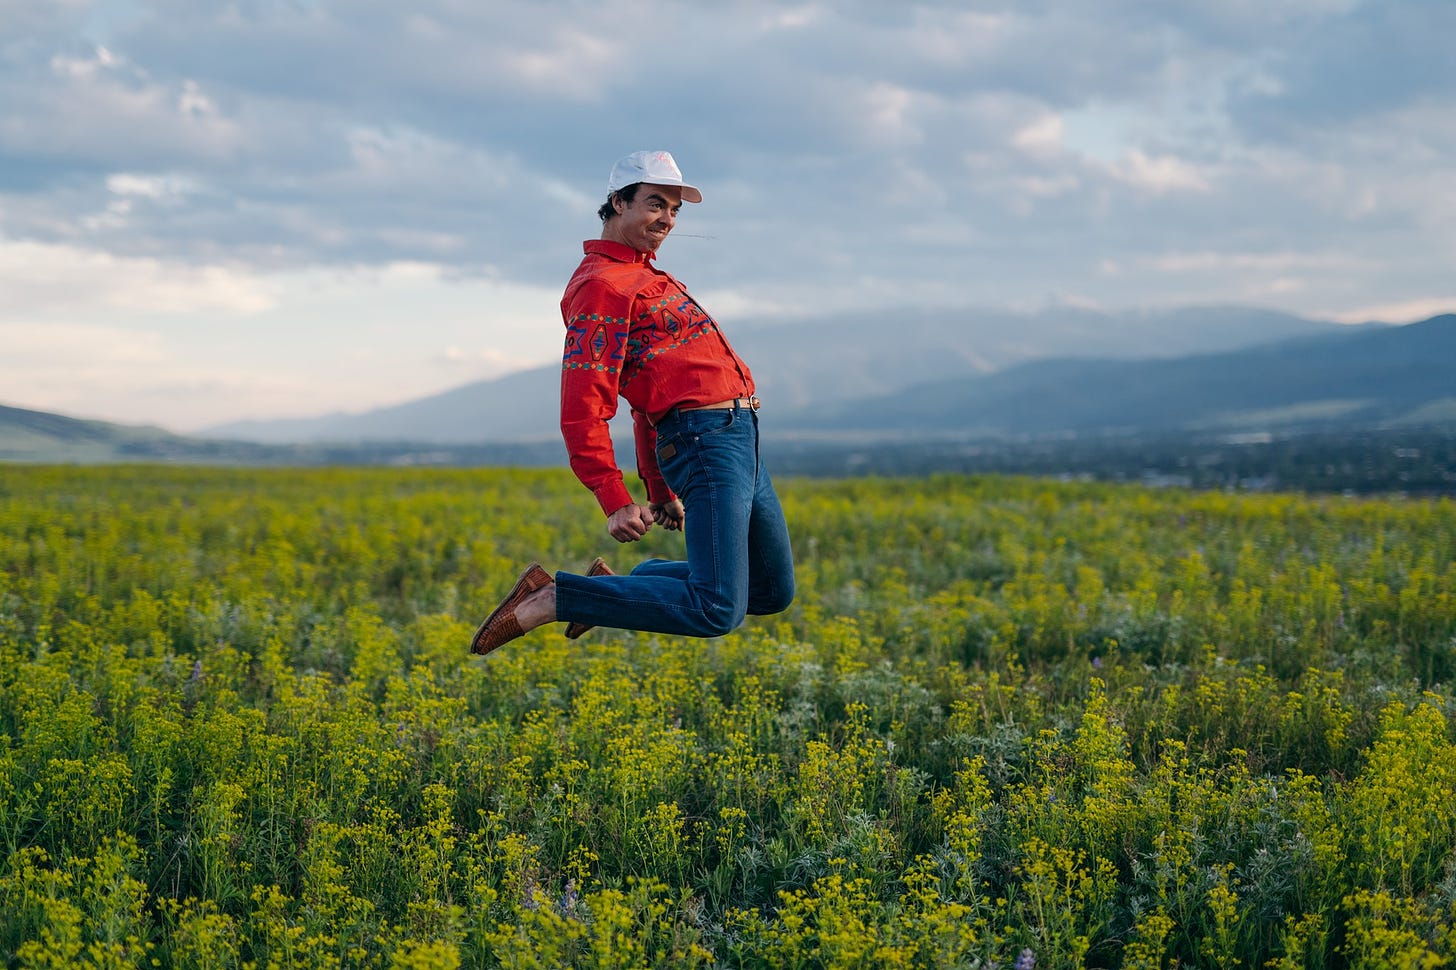 man in red jacket jumping in field